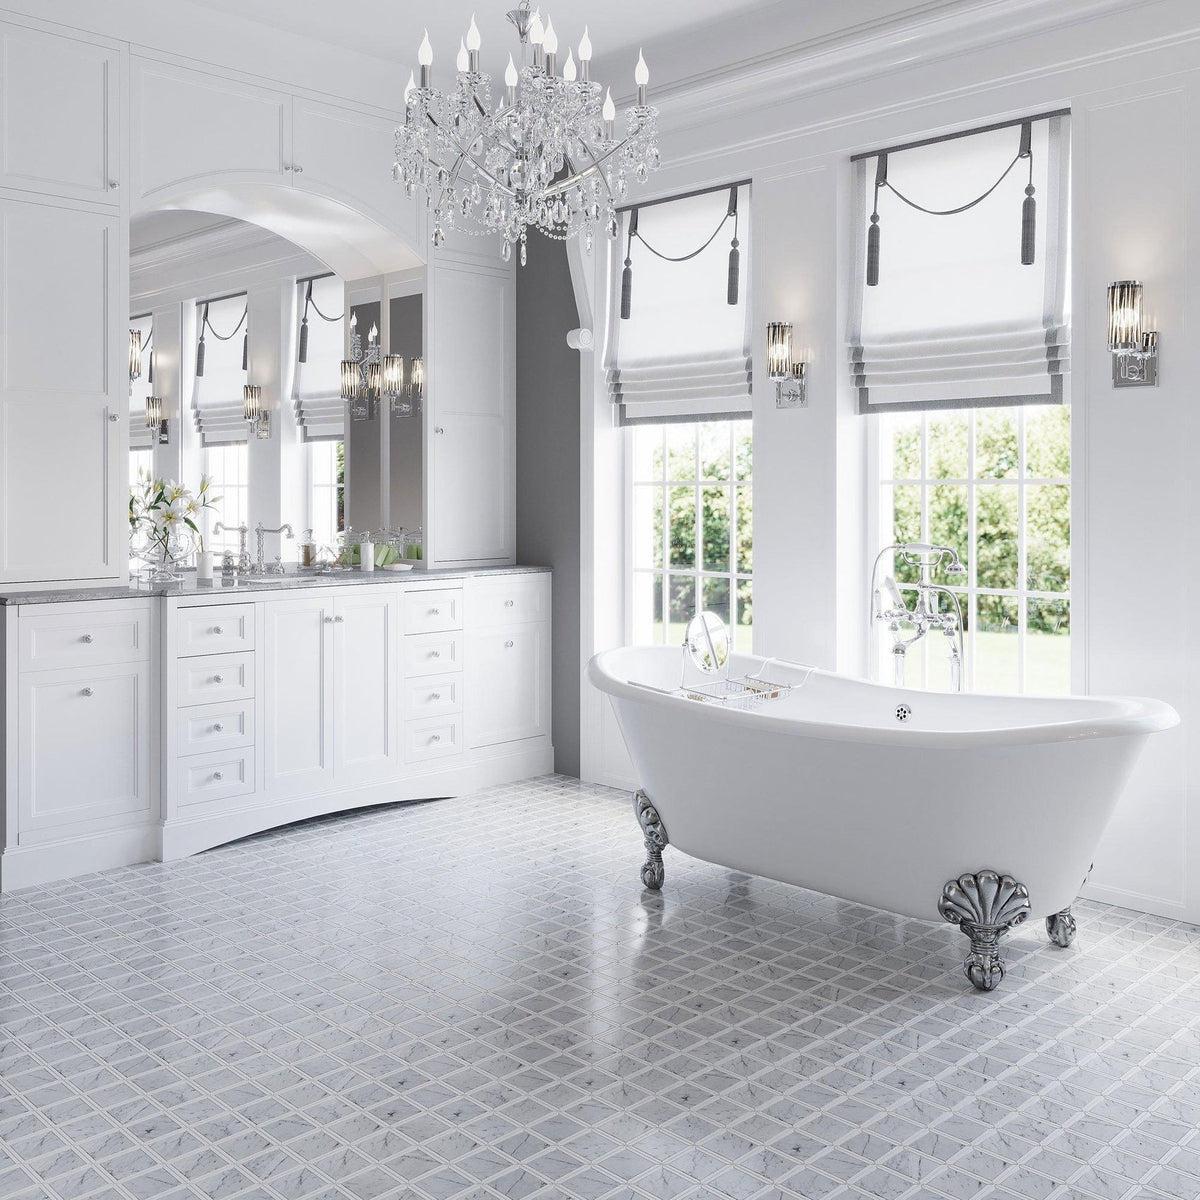 Elegant Marble Bathroom Floor for an All-White Glam Room with Clawfoot Freestanding Tub